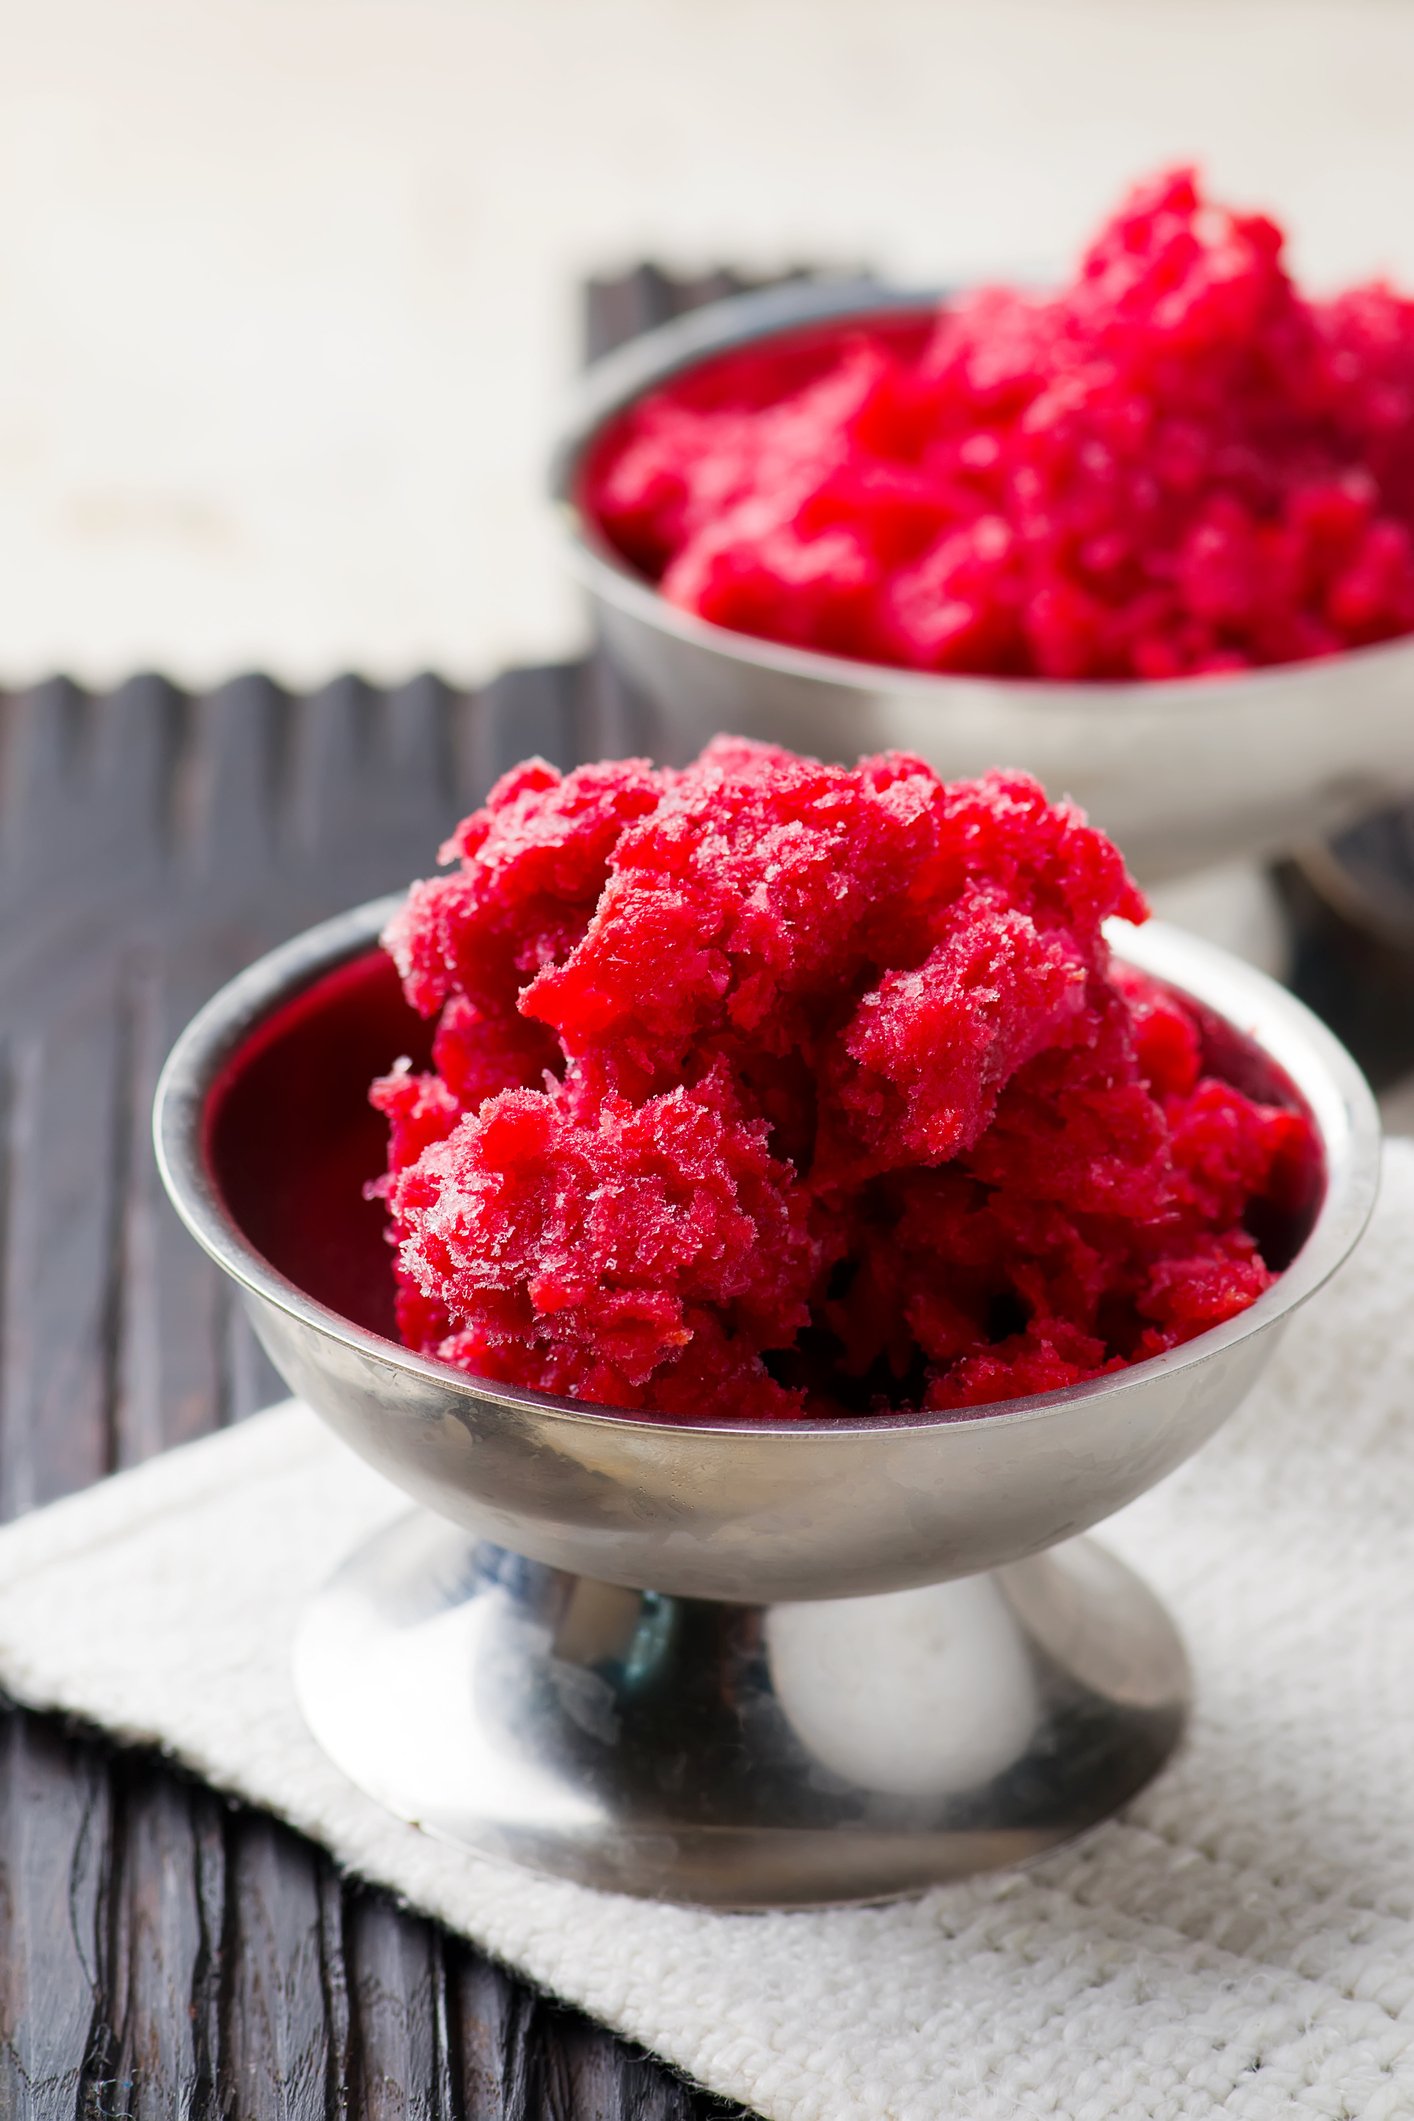 Sour cherries are in season and are a tangier choice of fruit to choose for your sorbet. (iStock Photo)